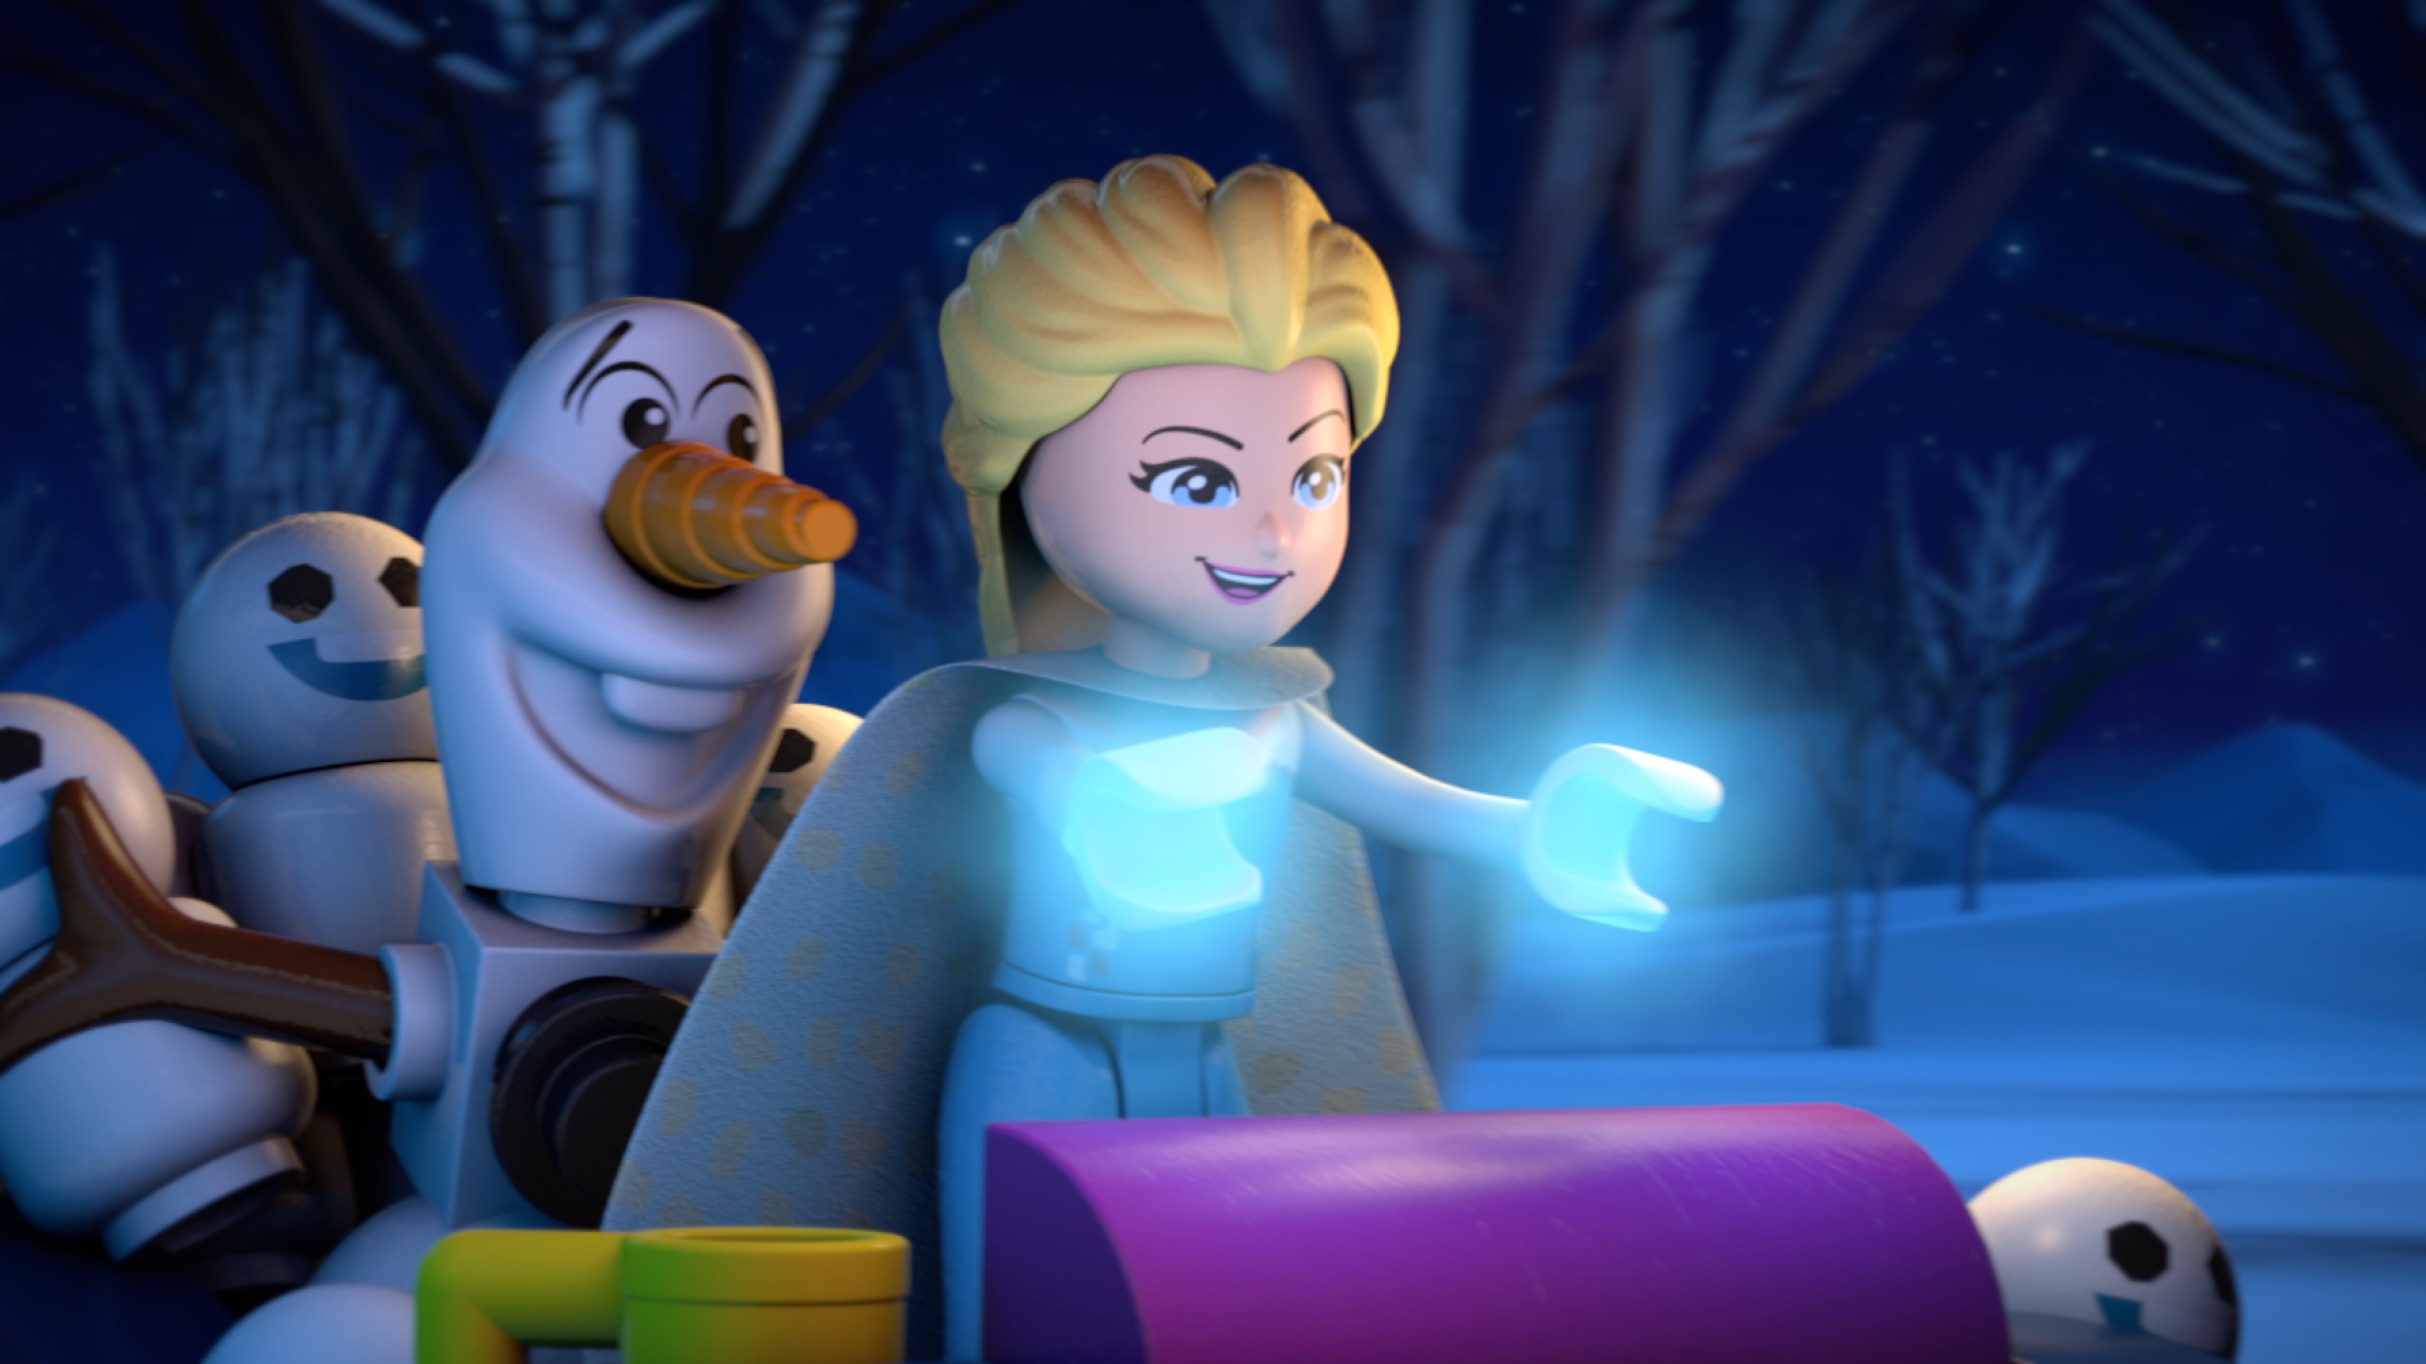 Go Back to Arendelle with Frozen Northern Lights | Oh My Disney